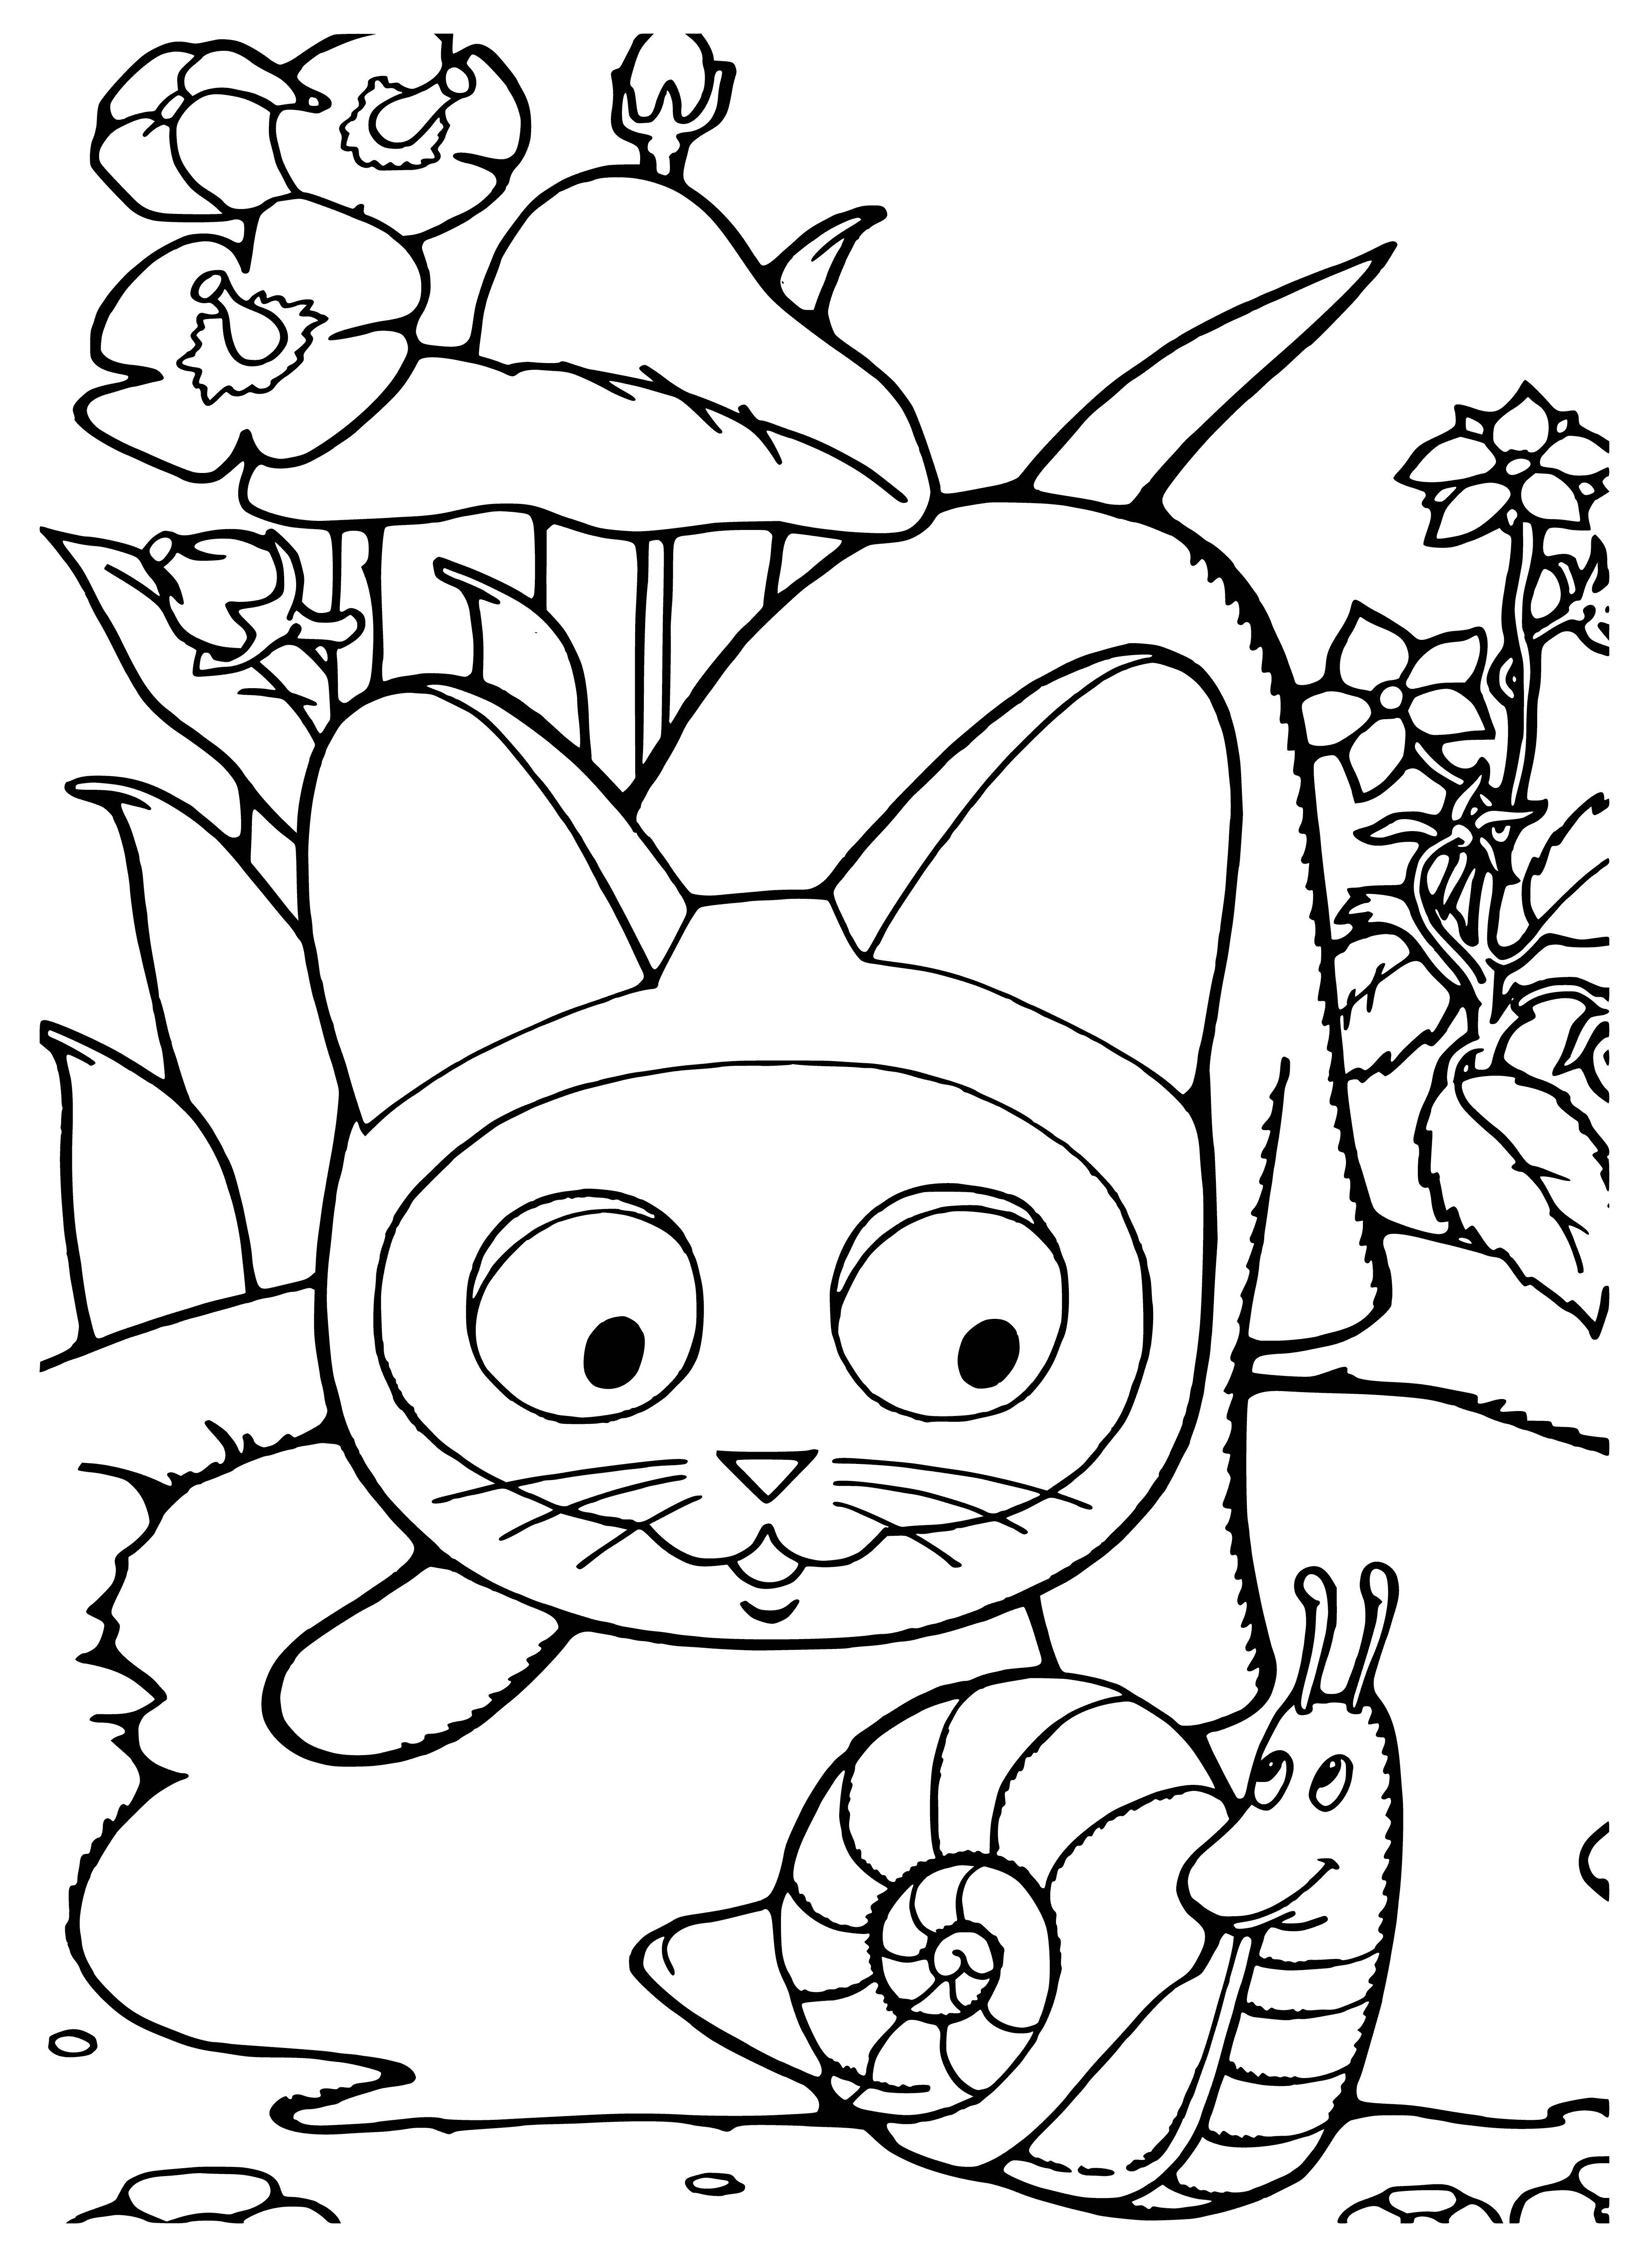 coloring page: Grey & white kitten w/big blue eyes, white face/belly/paws, & grey back/tail/ears.